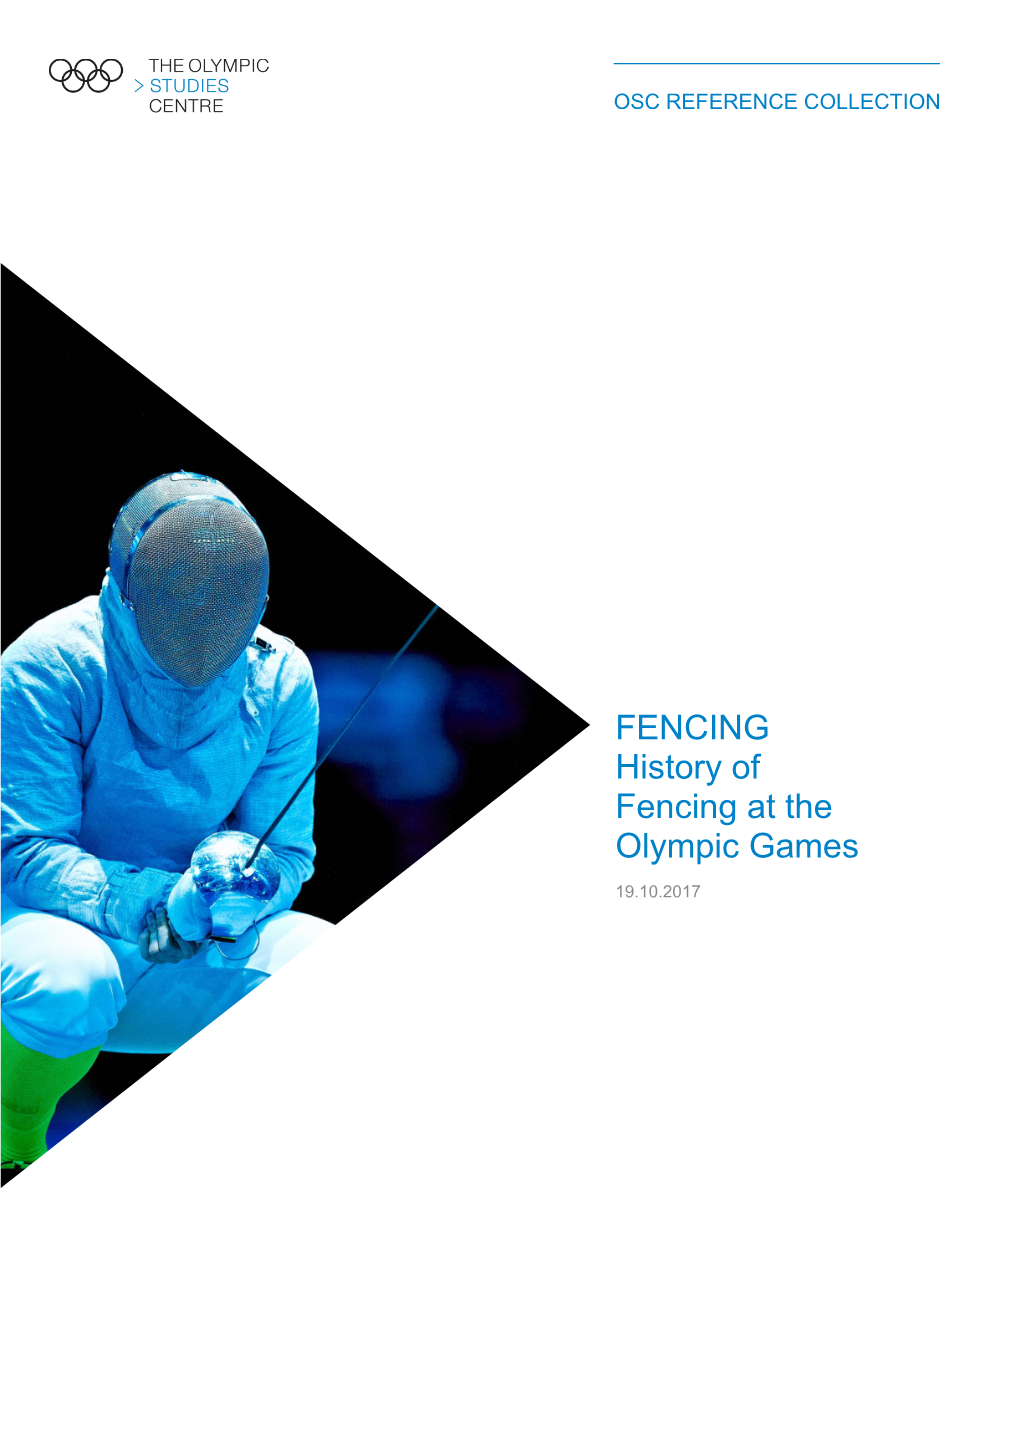 FENCING History of Fencing at the Olympic Games